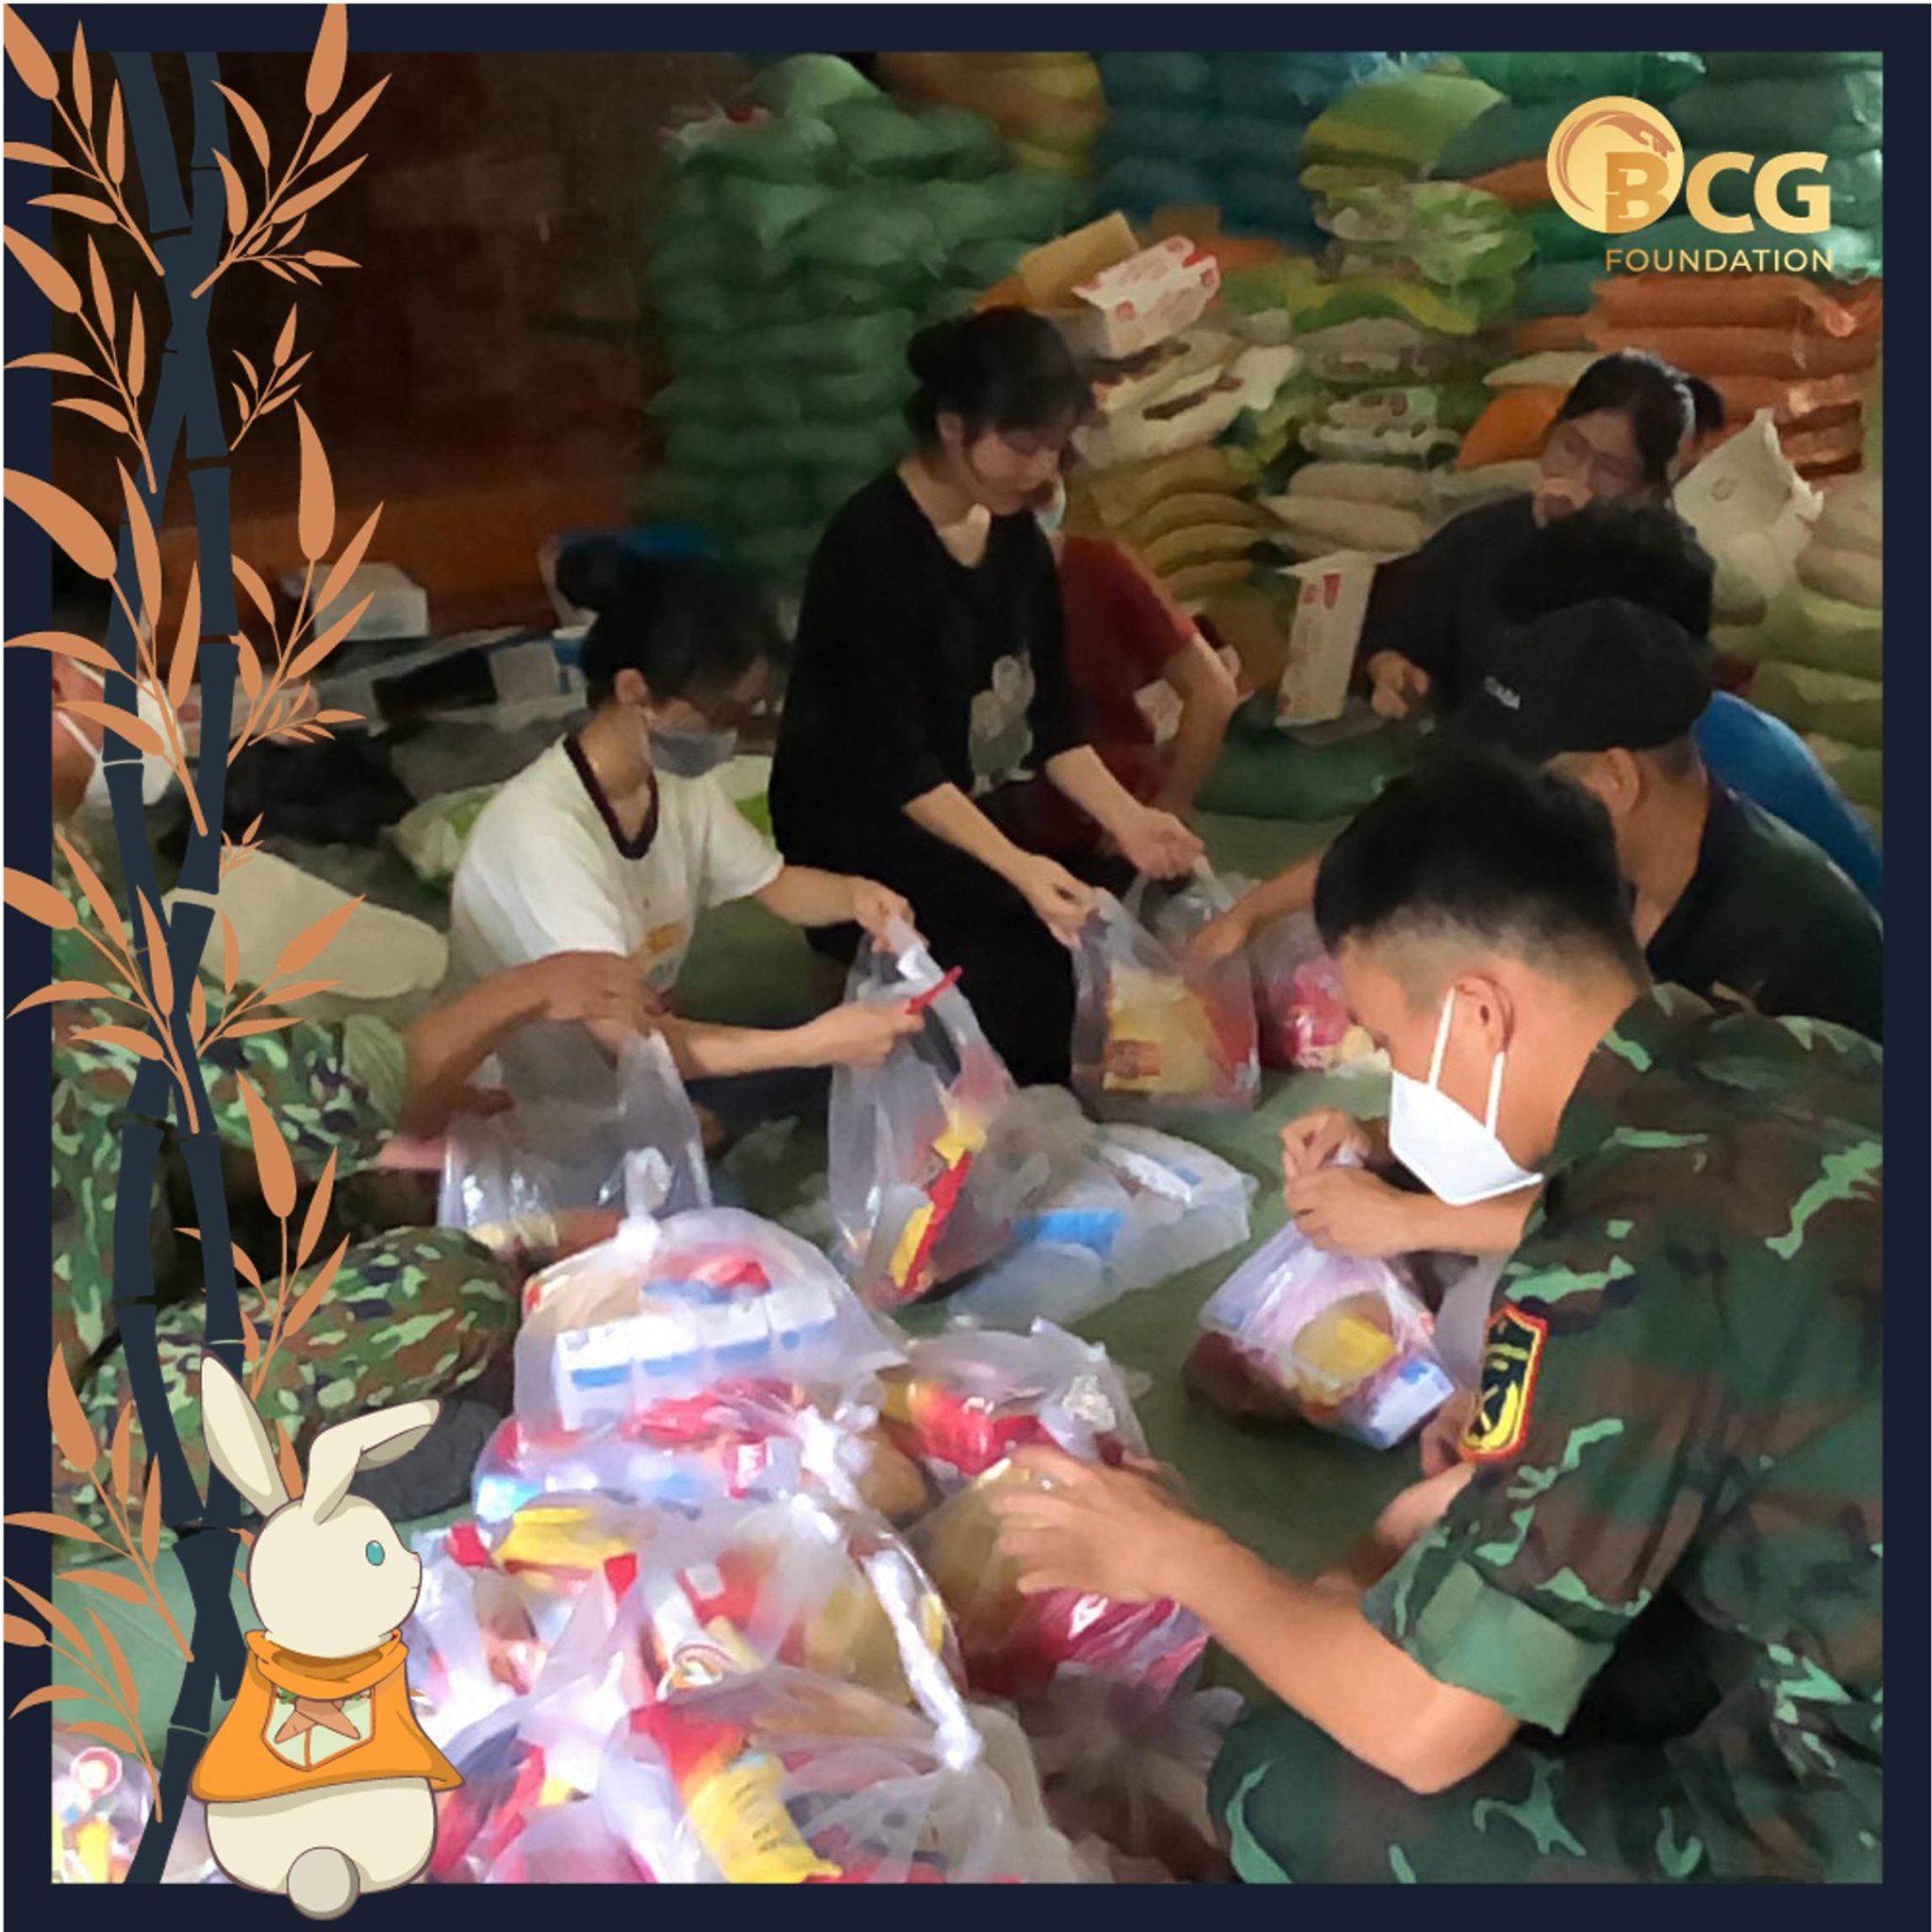 BCG Foundation gives more than 2,000 Mid-Autumn Festival gifts to children in Ho Chi Minh City